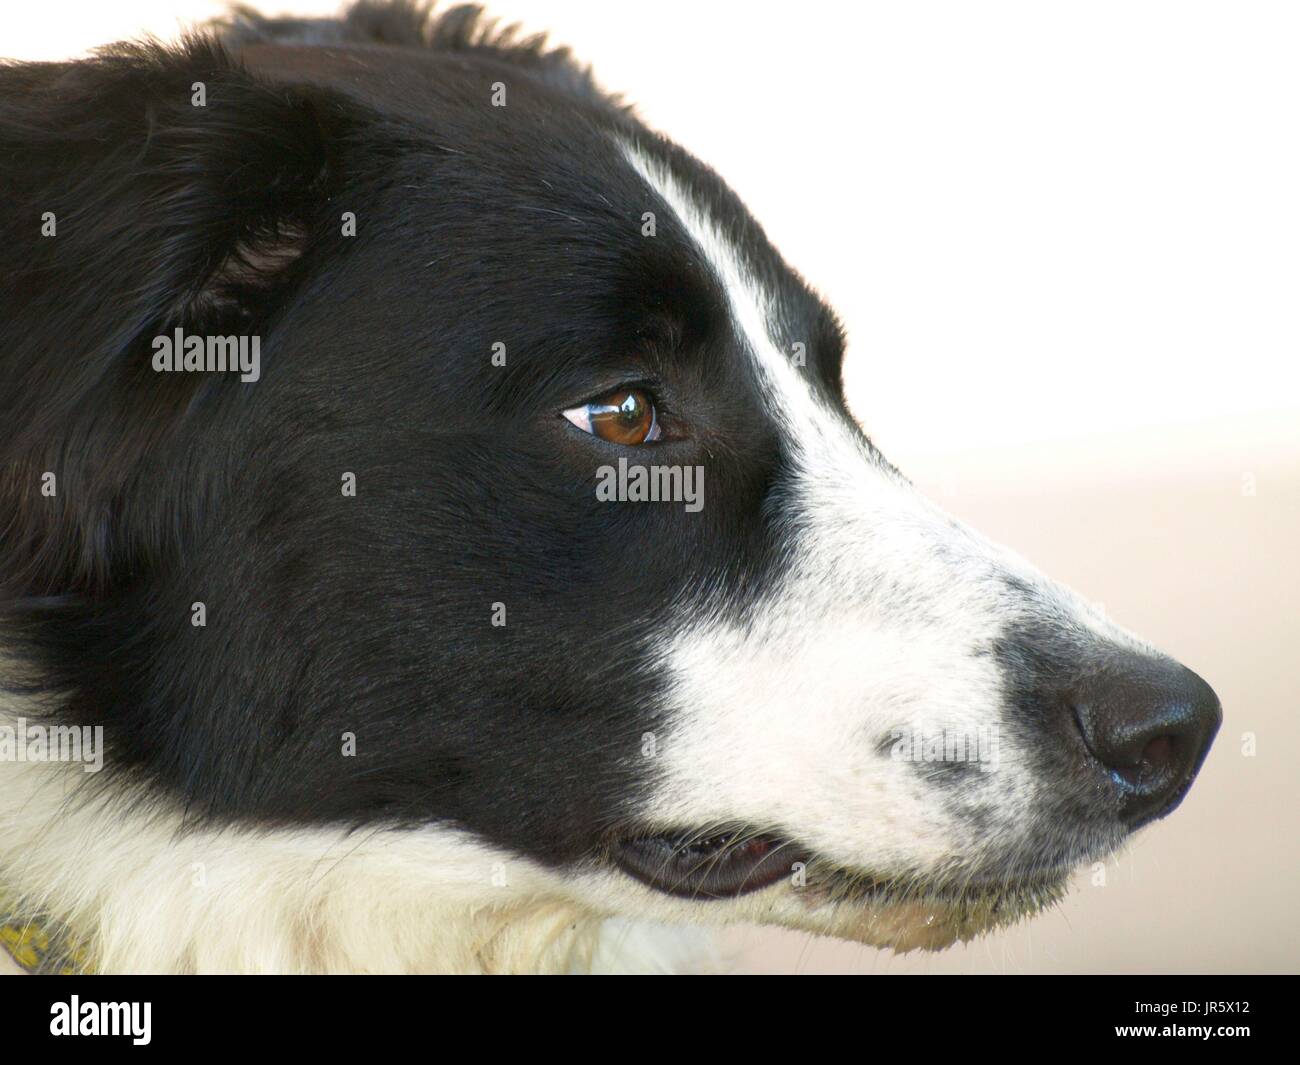 Black and white Border Collie dog with amber eyes close up shots Stock Photo